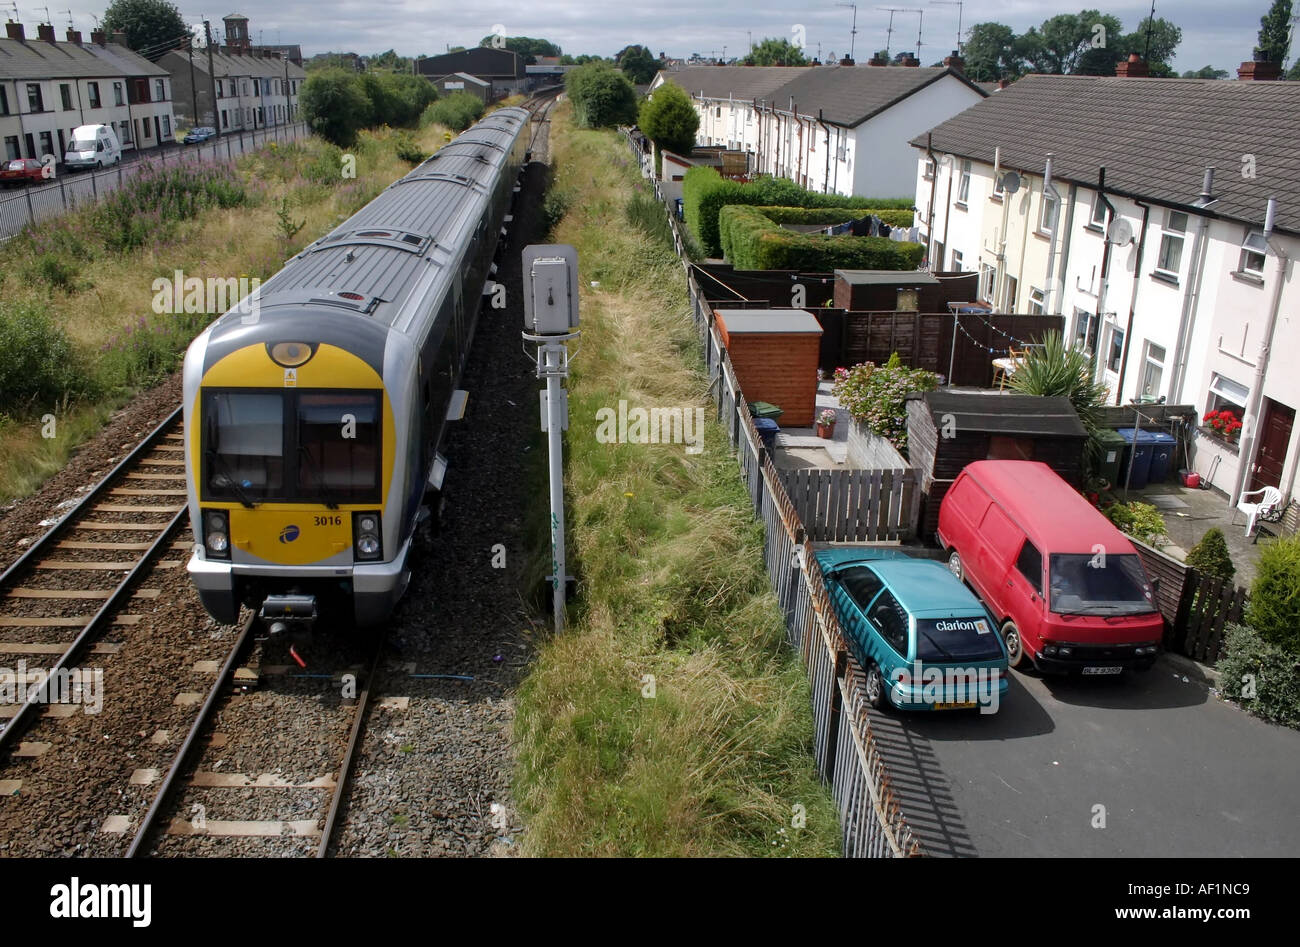 Diesel train on railway running next to terraced row of houses, Lurgan, County Armagh, Northern Ireland Stock Photo